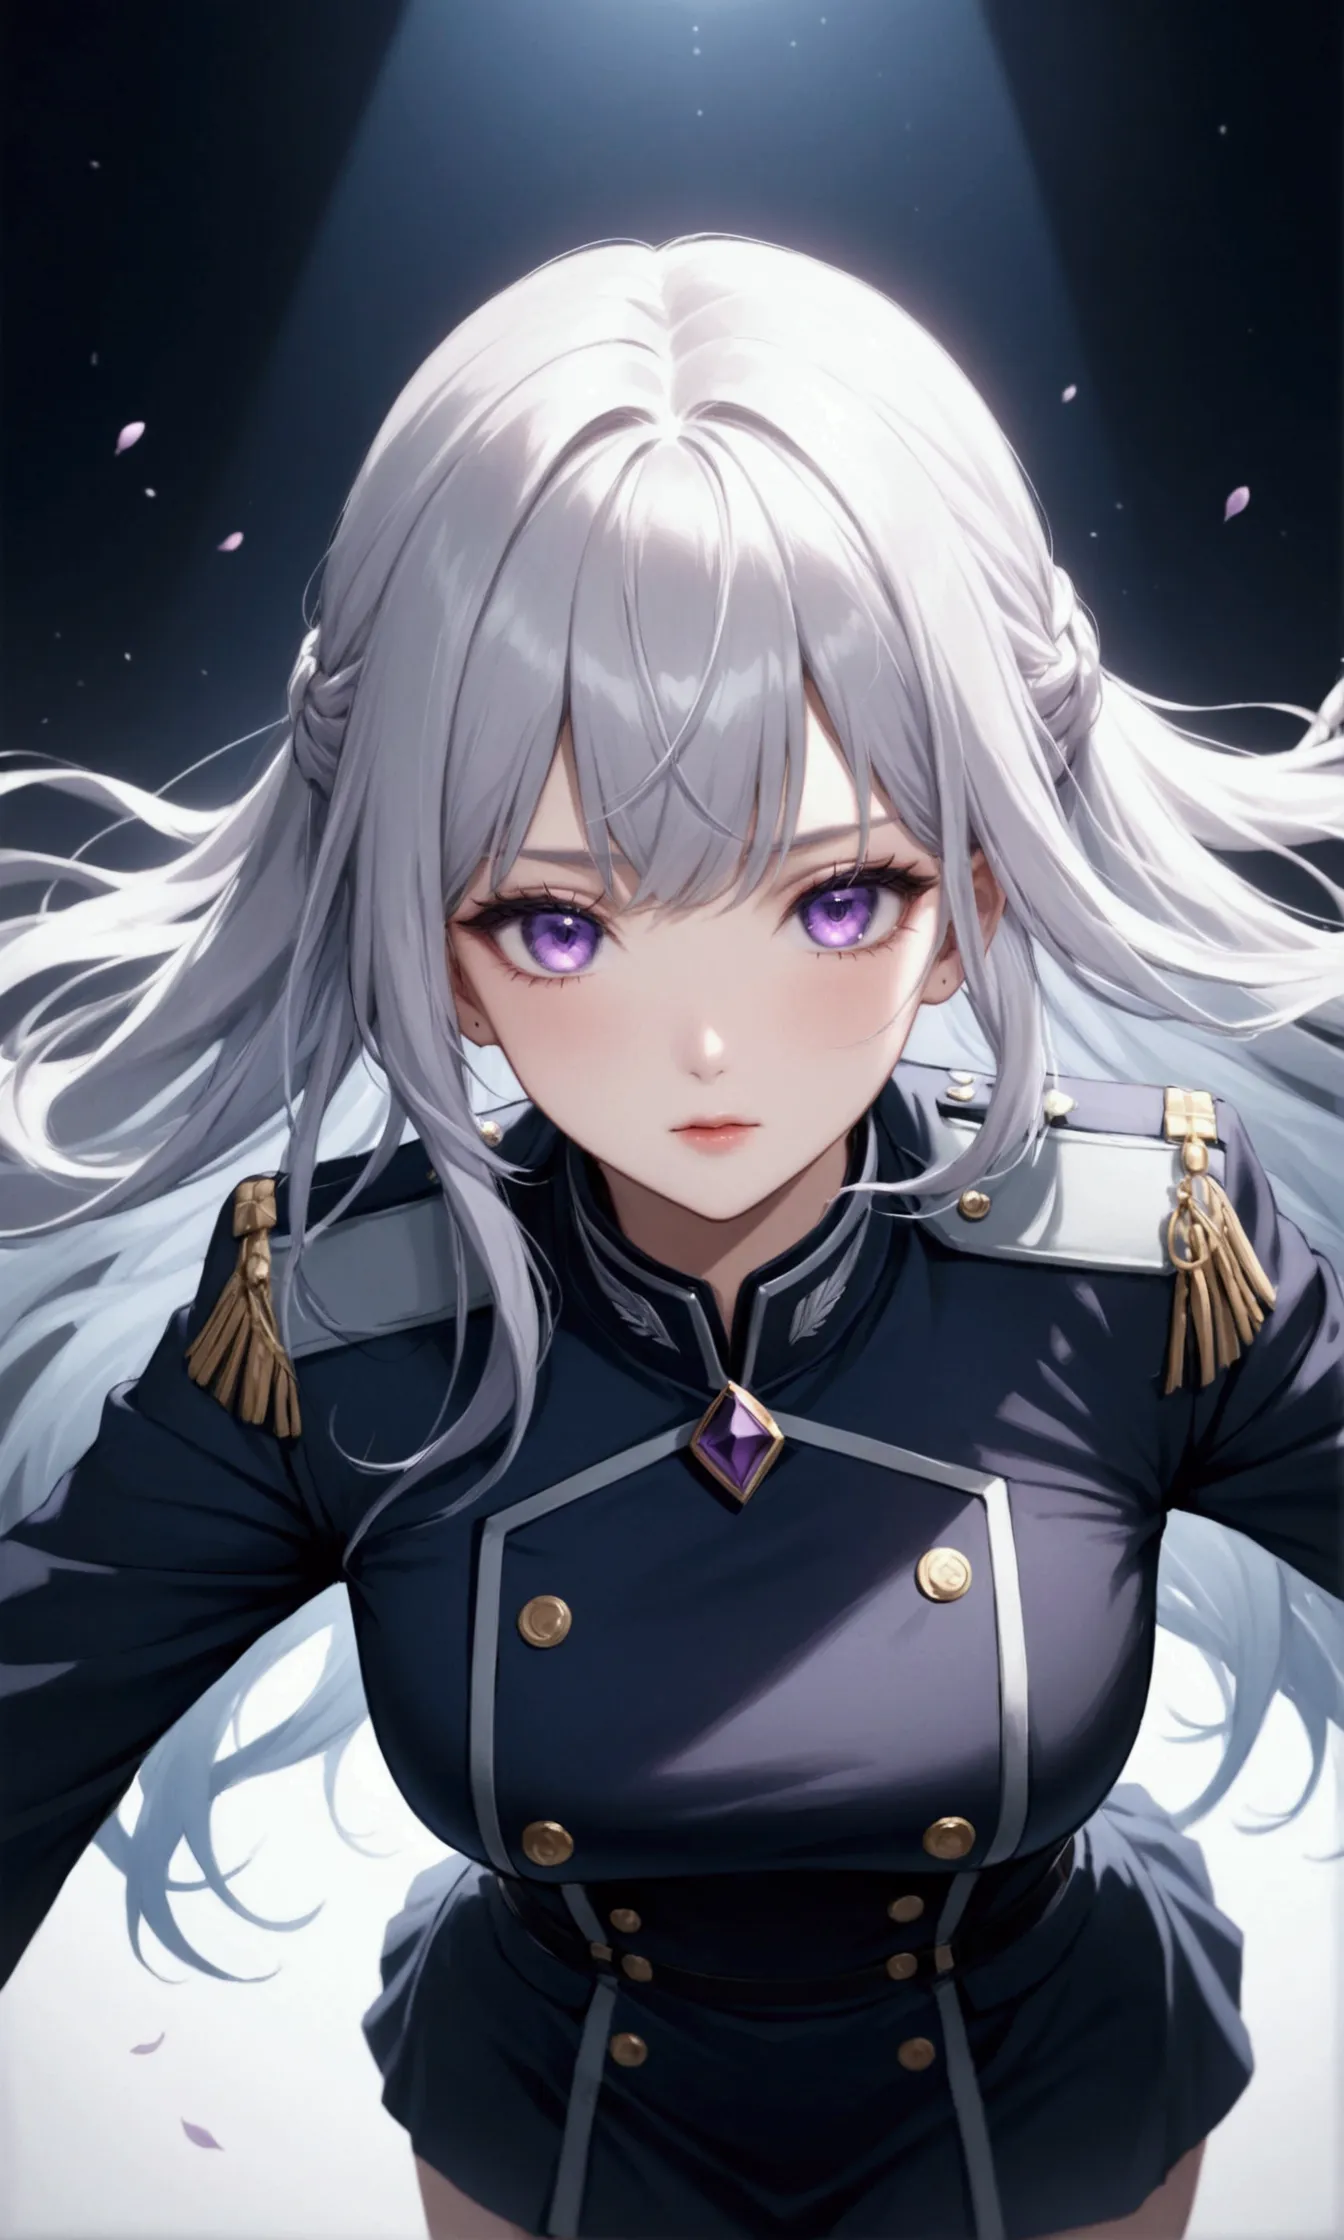 Highest quality、Delicate depiction、Beautiful woman、Silver Hair、Long Hair、Amethyst Eyes、Blue-gray military uniform、